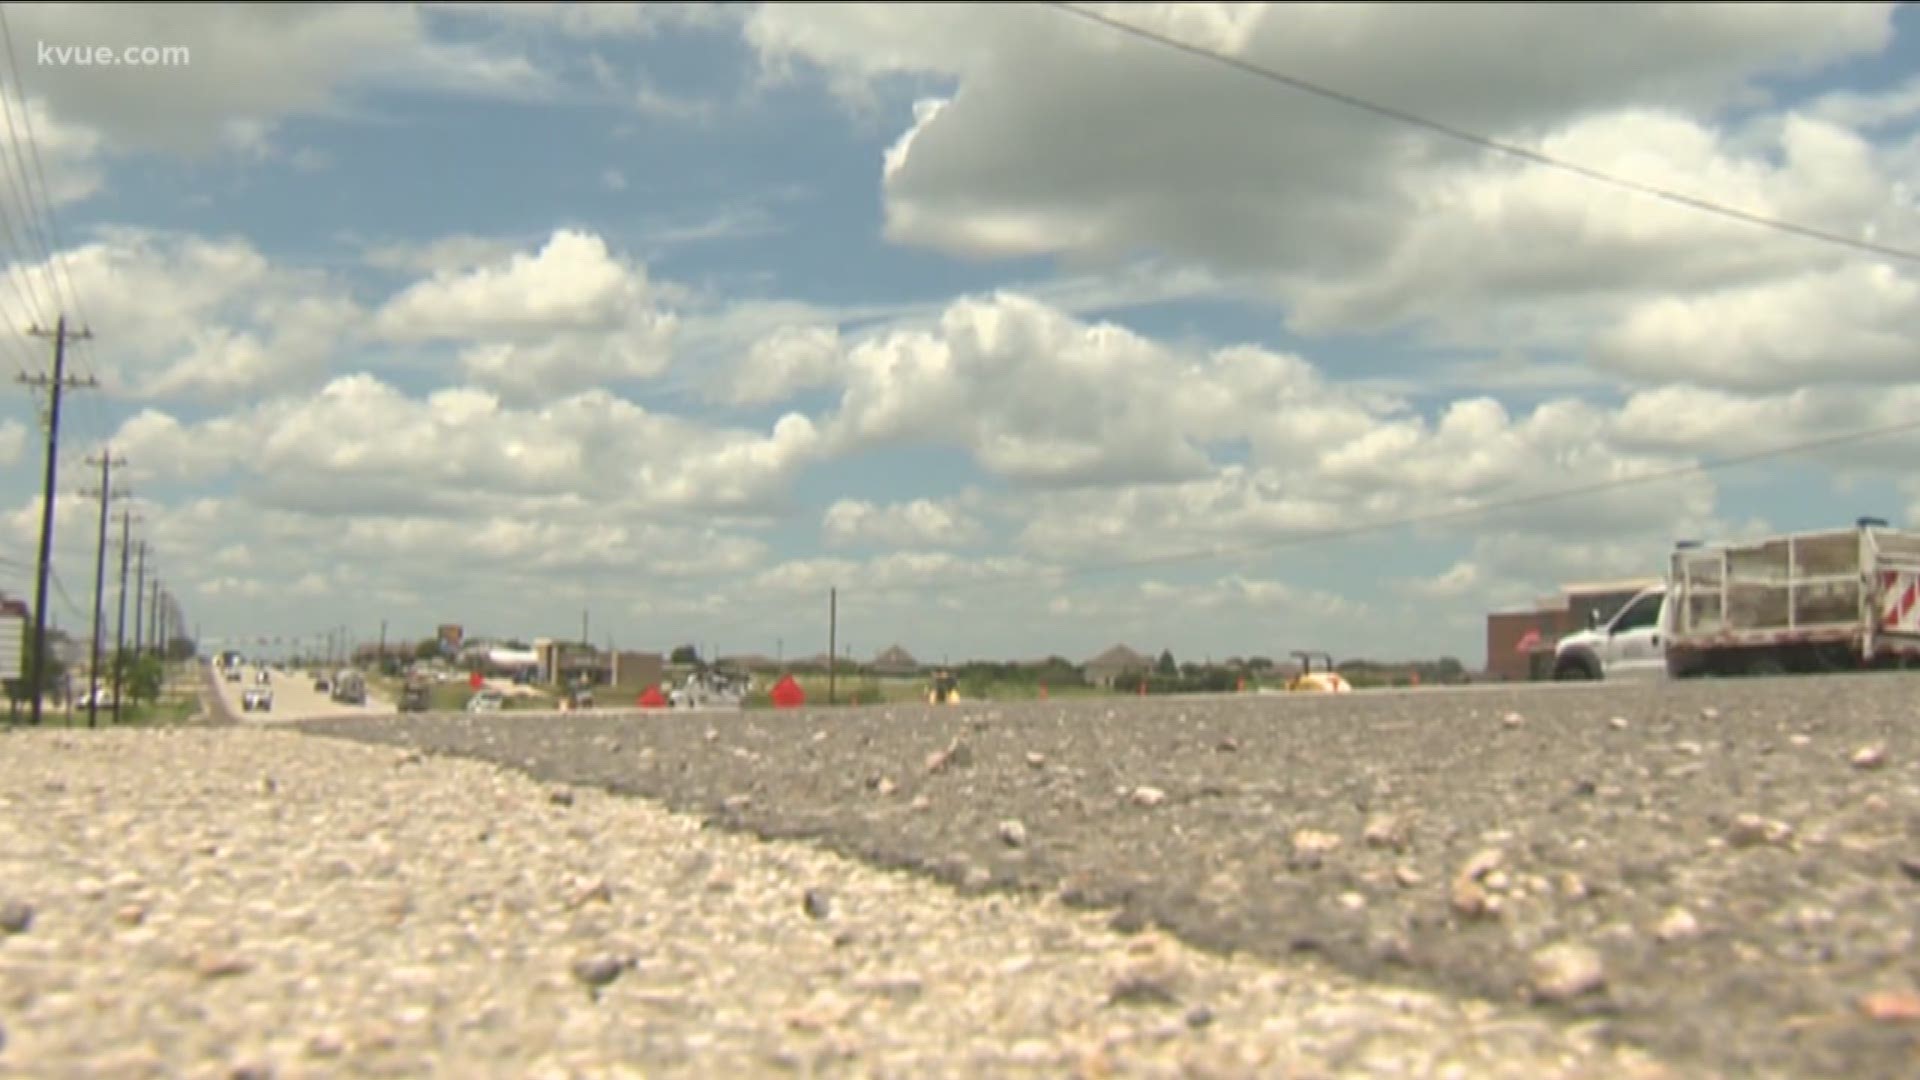 Some people in Liberty Hill say the intersection they use to get to and from home is unsafe.